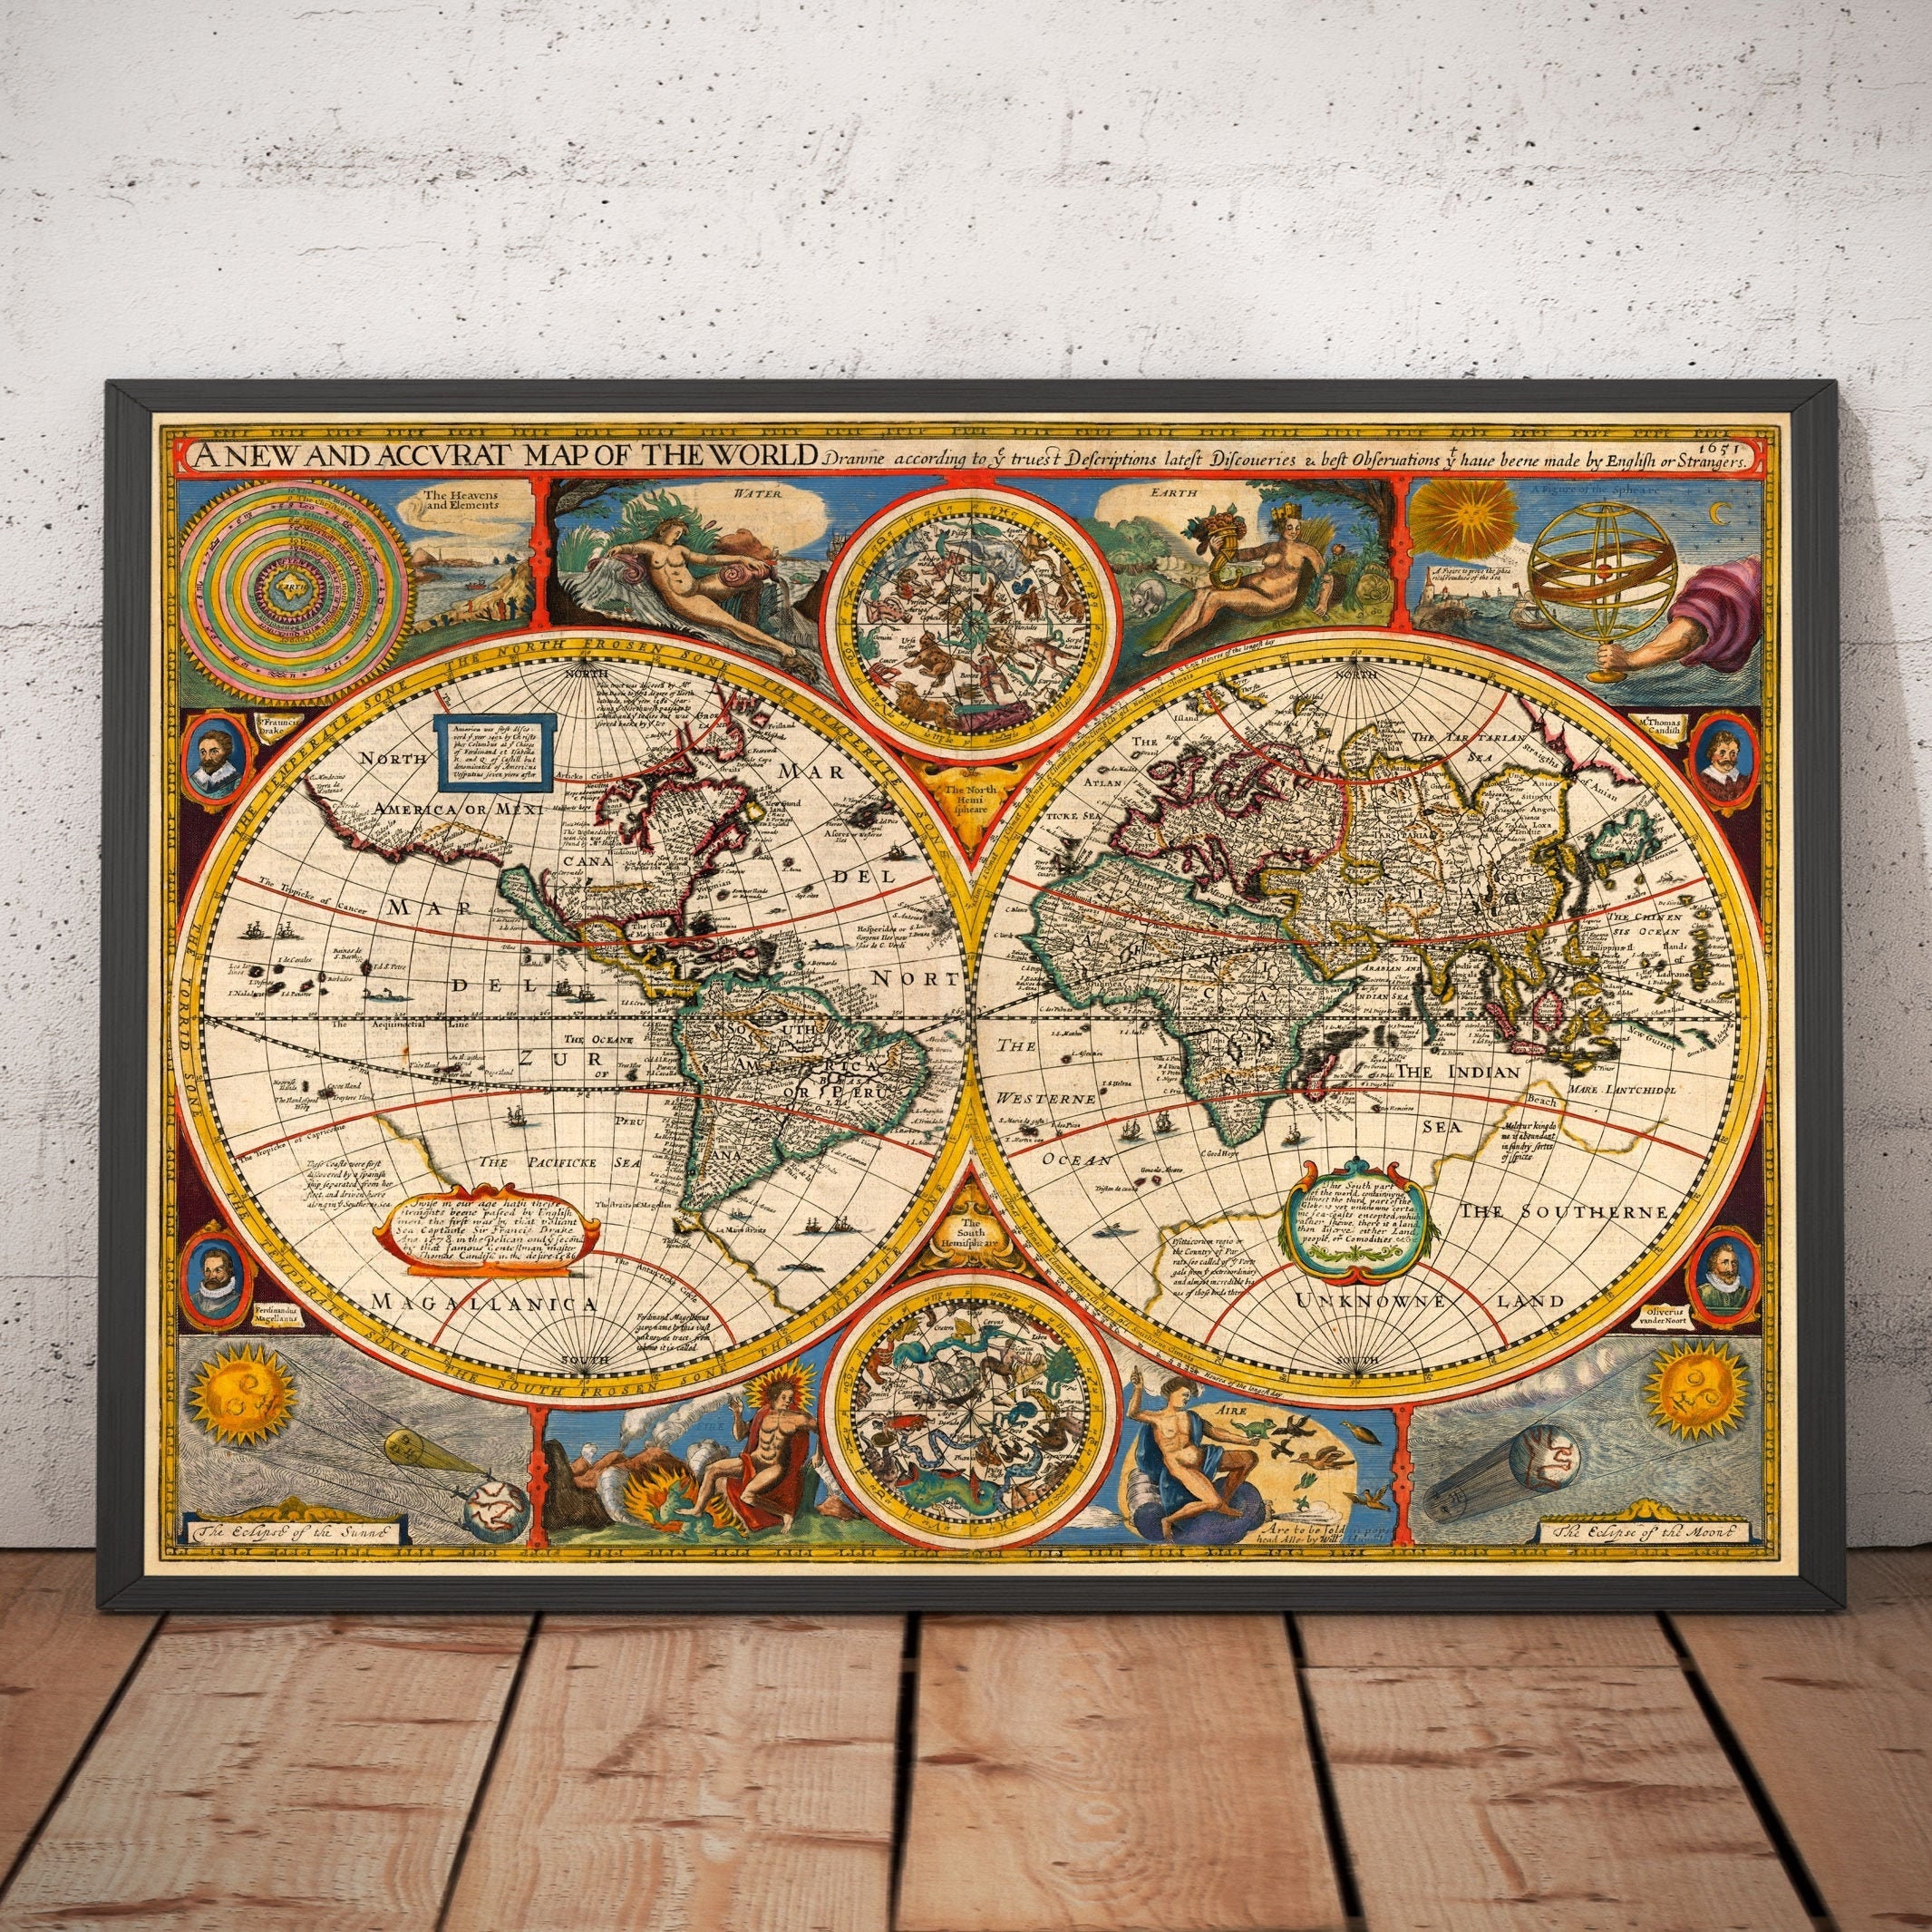 Rare Old World Atlas Map From 1651 by John Speed Colour Vintage Wall Chart  Framed or Unframed 